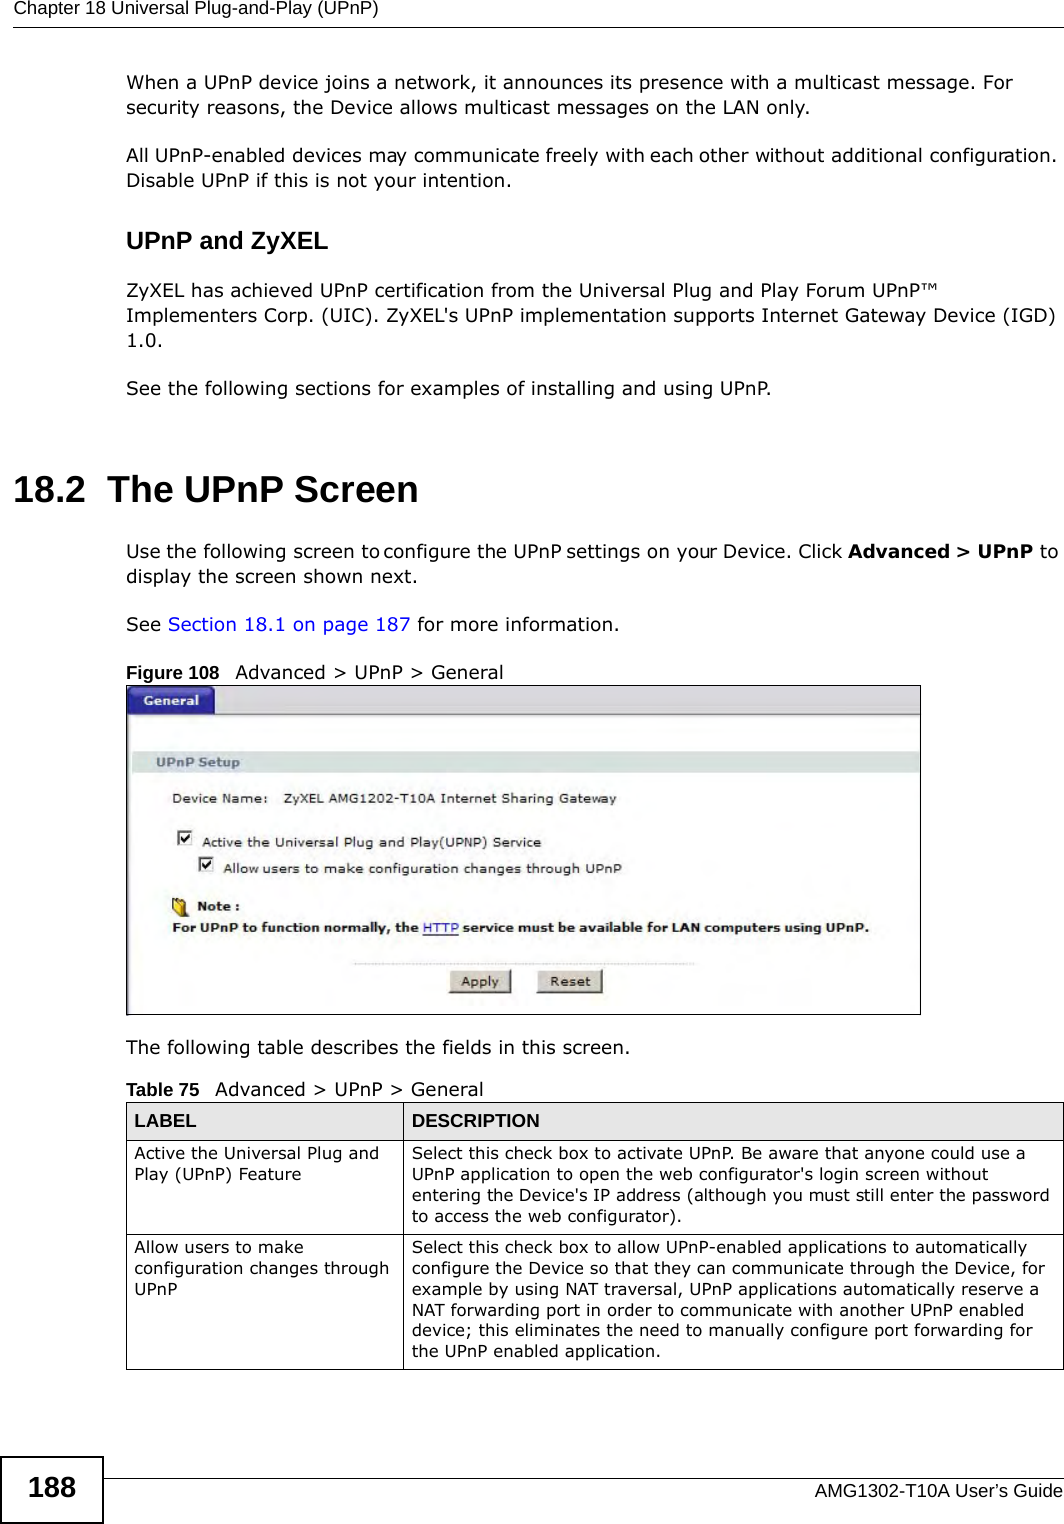 Chapter 18 Universal Plug-and-Play (UPnP)AMG1302-T10A User’s Guide188When a UPnP device joins a network, it announces its presence with a multicast message. For security reasons, the Device allows multicast messages on the LAN only.All UPnP-enabled devices may communicate freely with each other without additional configuration. Disable UPnP if this is not your intention. UPnP and ZyXELZyXEL has achieved UPnP certification from the Universal Plug and Play Forum UPnP™ Implementers Corp. (UIC). ZyXEL&apos;s UPnP implementation supports Internet Gateway Device (IGD) 1.0. See the following sections for examples of installing and using UPnP.18.2  The UPnP ScreenUse the following screen to configure the UPnP settings on your Device. Click Advanced &gt; UPnP to display the screen shown next.See Section 18.1 on page 187 for more information. Figure 108   Advanced &gt; UPnP &gt; GeneralThe following table describes the fields in this screen. Table 75   Advanced &gt; UPnP &gt; GeneralLABEL DESCRIPTIONActive the Universal Plug and Play (UPnP) FeatureSelect this check box to activate UPnP. Be aware that anyone could use a UPnP application to open the web configurator&apos;s login screen without entering the Device&apos;s IP address (although you must still enter the password to access the web configurator).Allow users to make configuration changes through UPnPSelect this check box to allow UPnP-enabled applications to automatically configure the Device so that they can communicate through the Device, for example by using NAT traversal, UPnP applications automatically reserve a NAT forwarding port in order to communicate with another UPnP enabled device; this eliminates the need to manually configure port forwarding for the UPnP enabled application. 